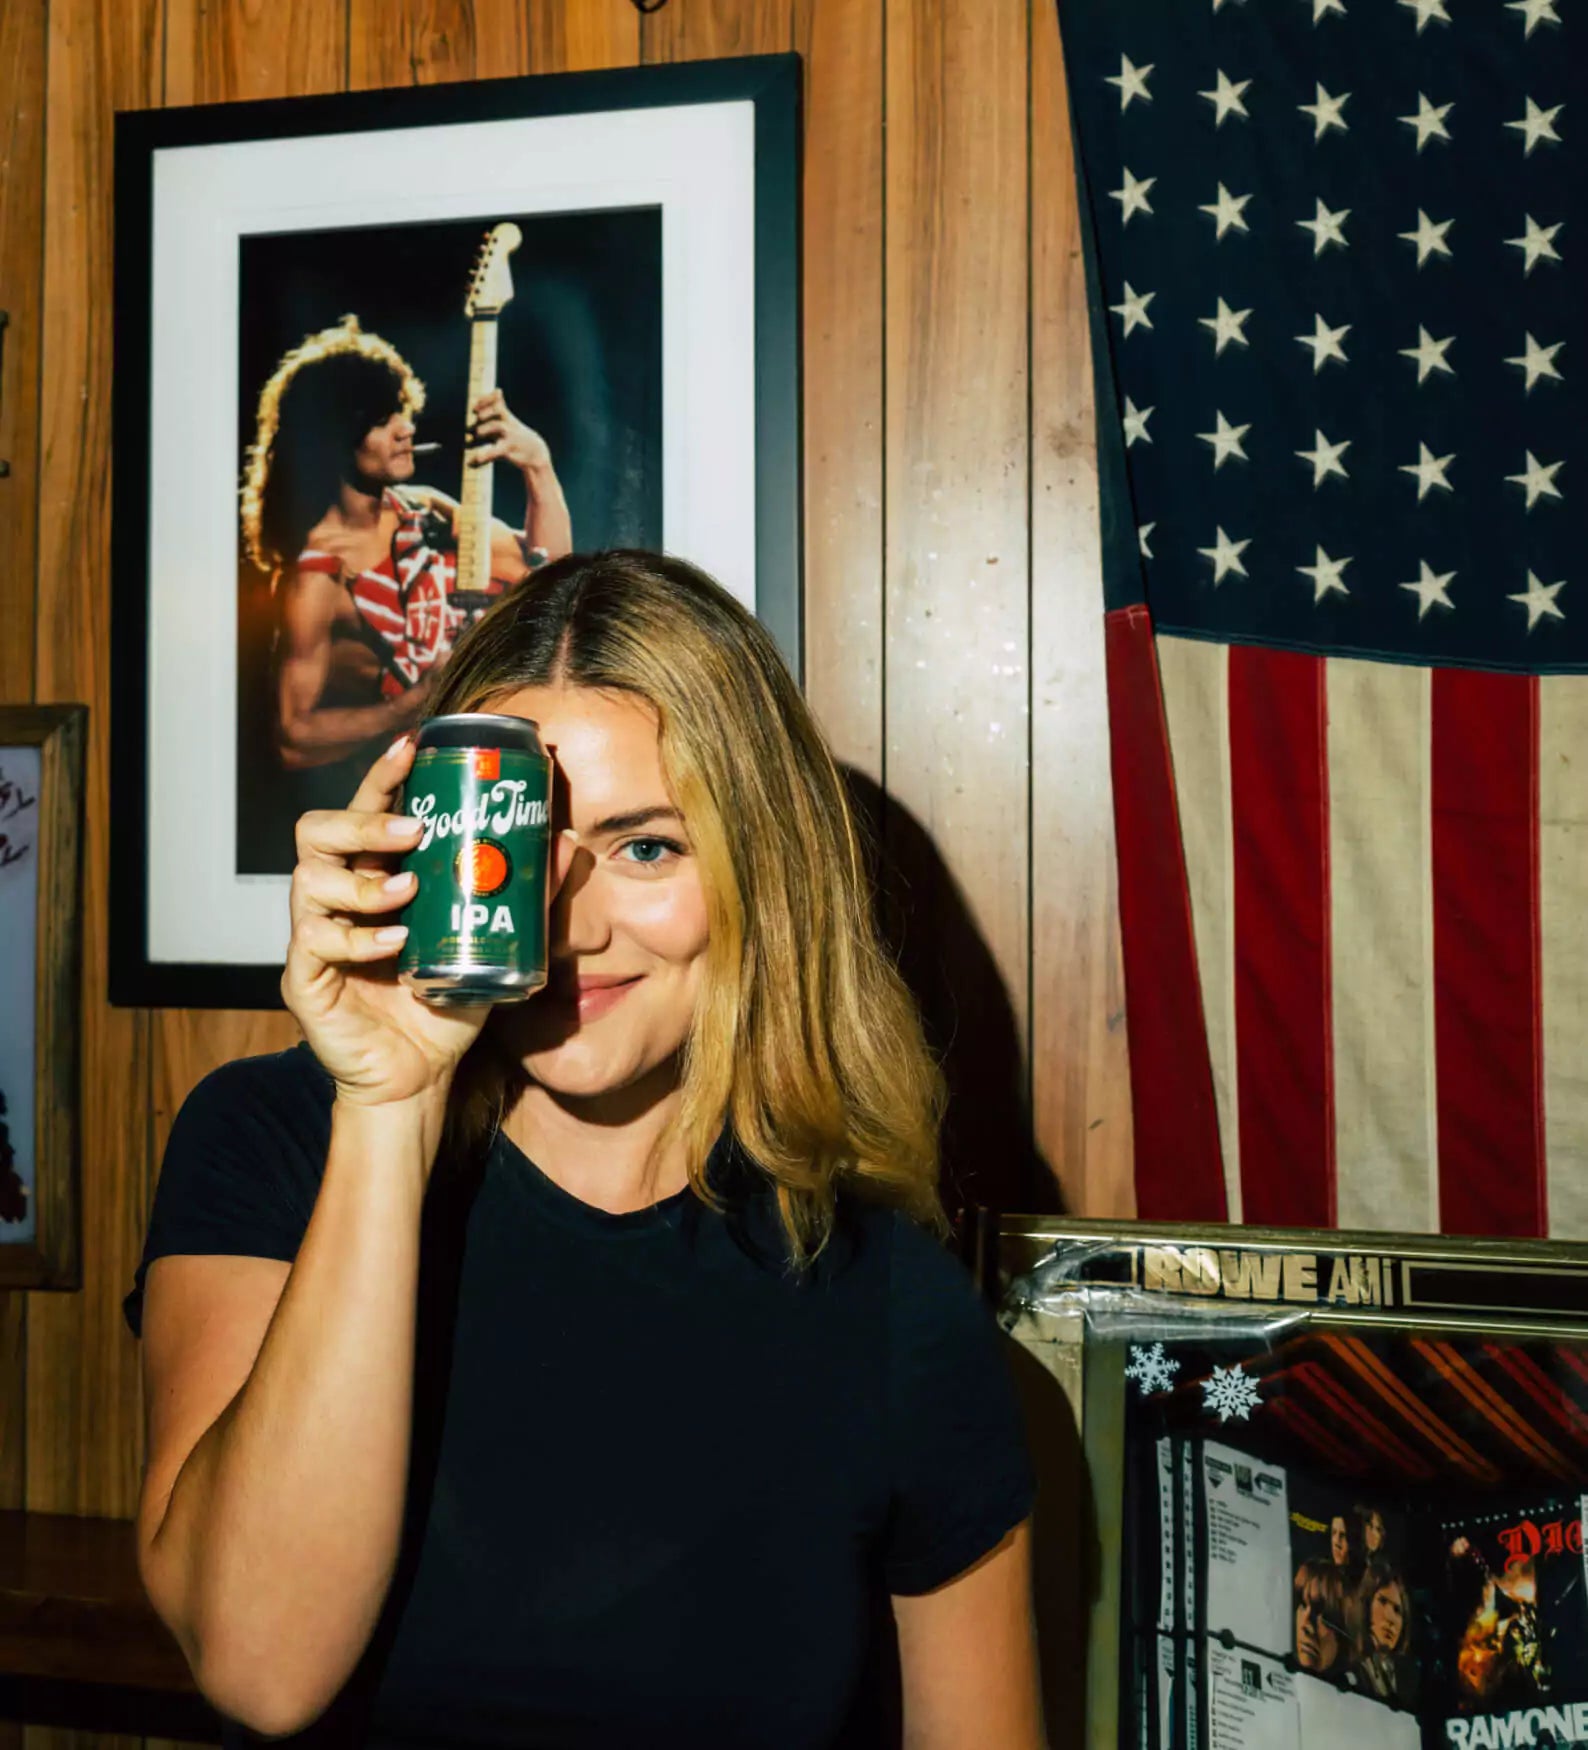 A woman holding a 'Good Time IPA Non Alcoholic Beer' in front of her frace. Behind her is a guy playing guitar, as well as an american flag, and to the bottom right of the photo is what appears to be an old school juke box.